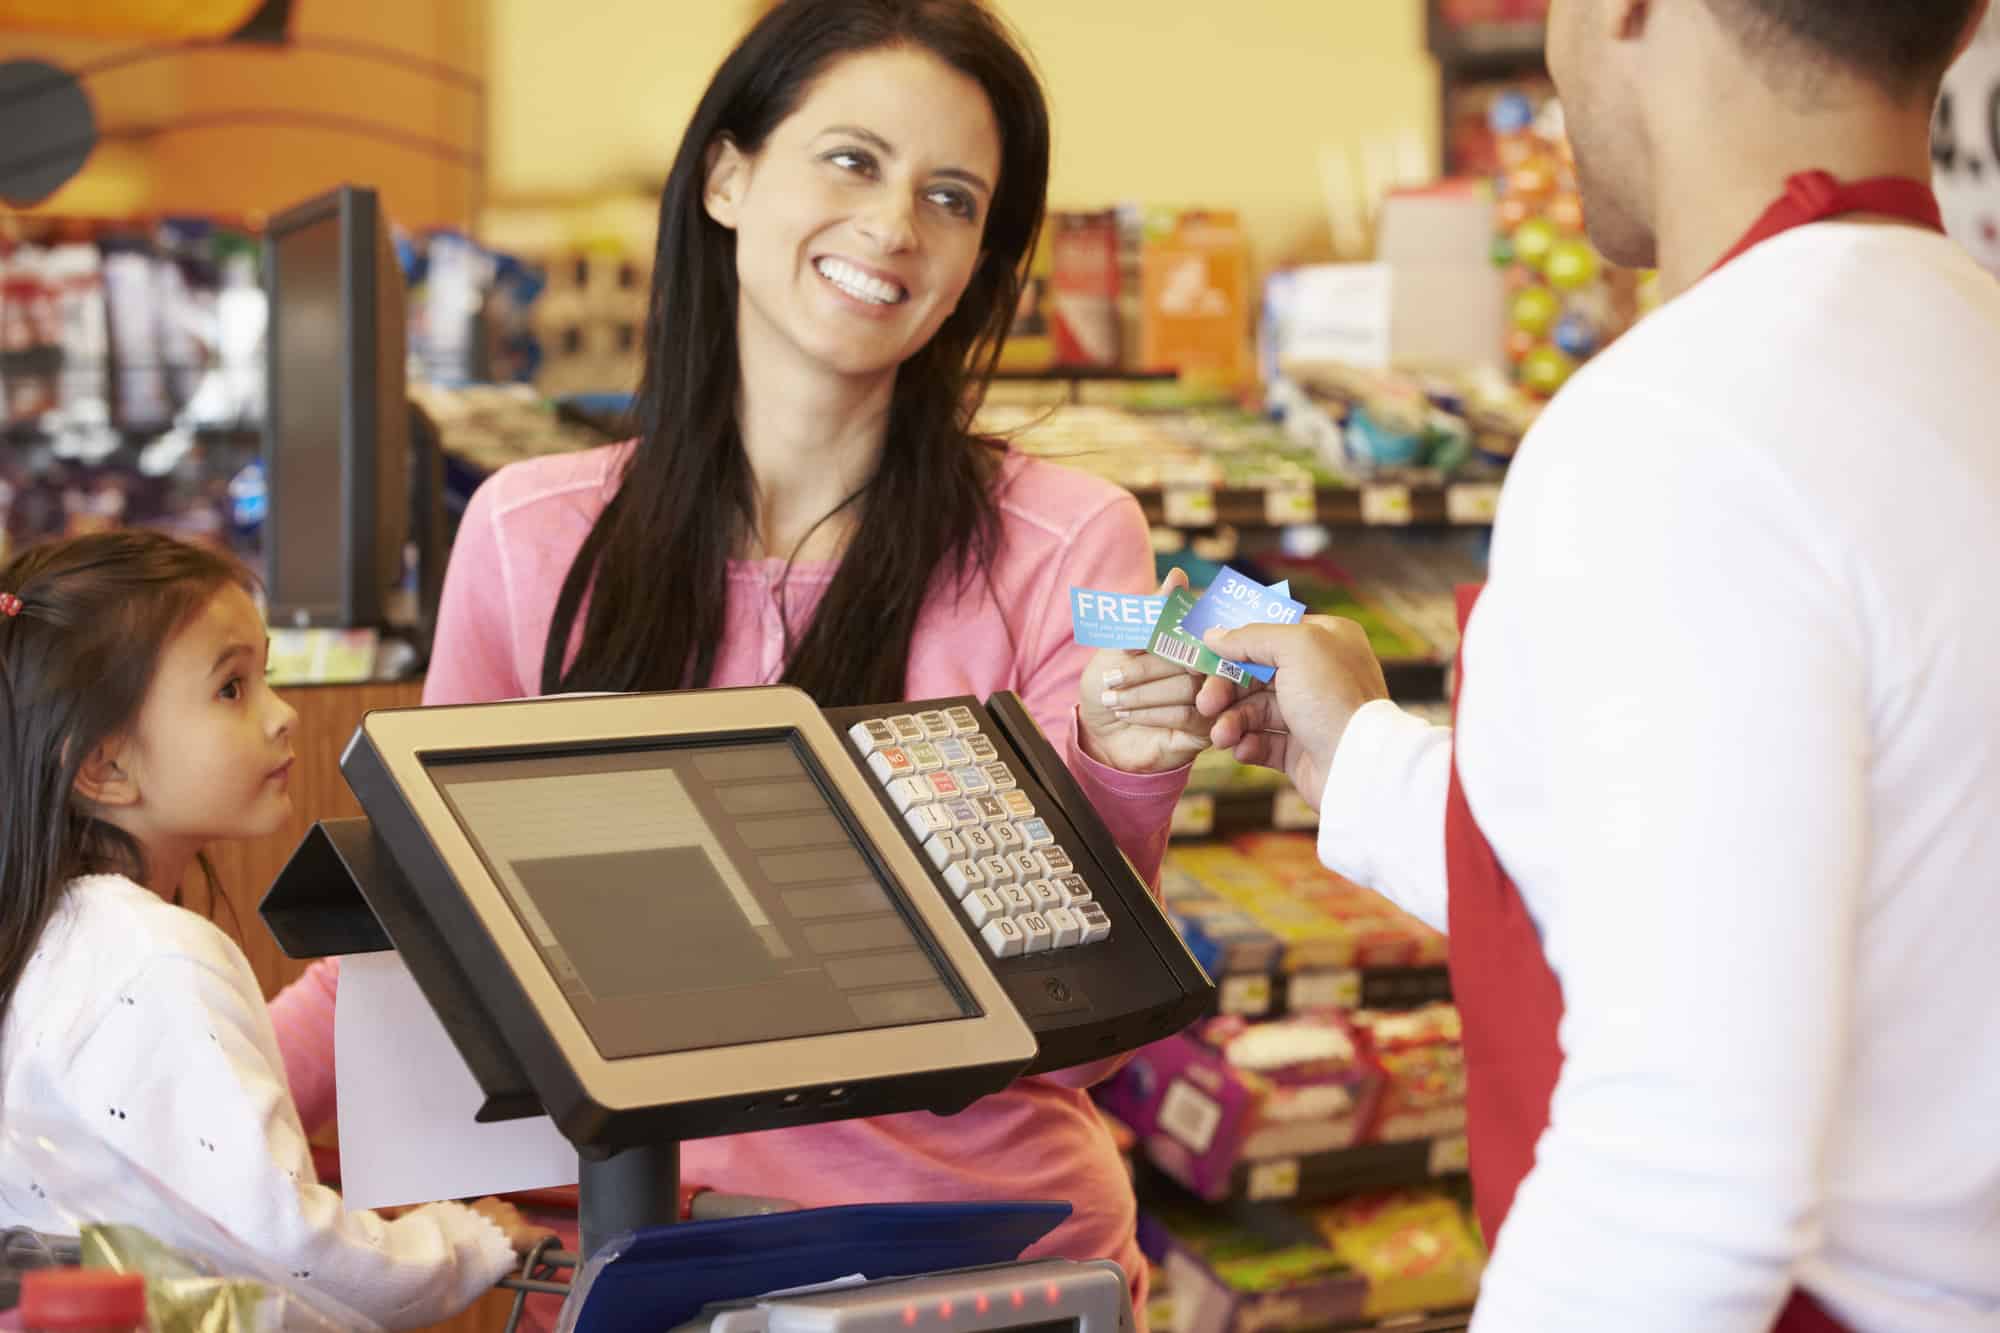 Mother Paying For Family Shopping At Checkout With Card